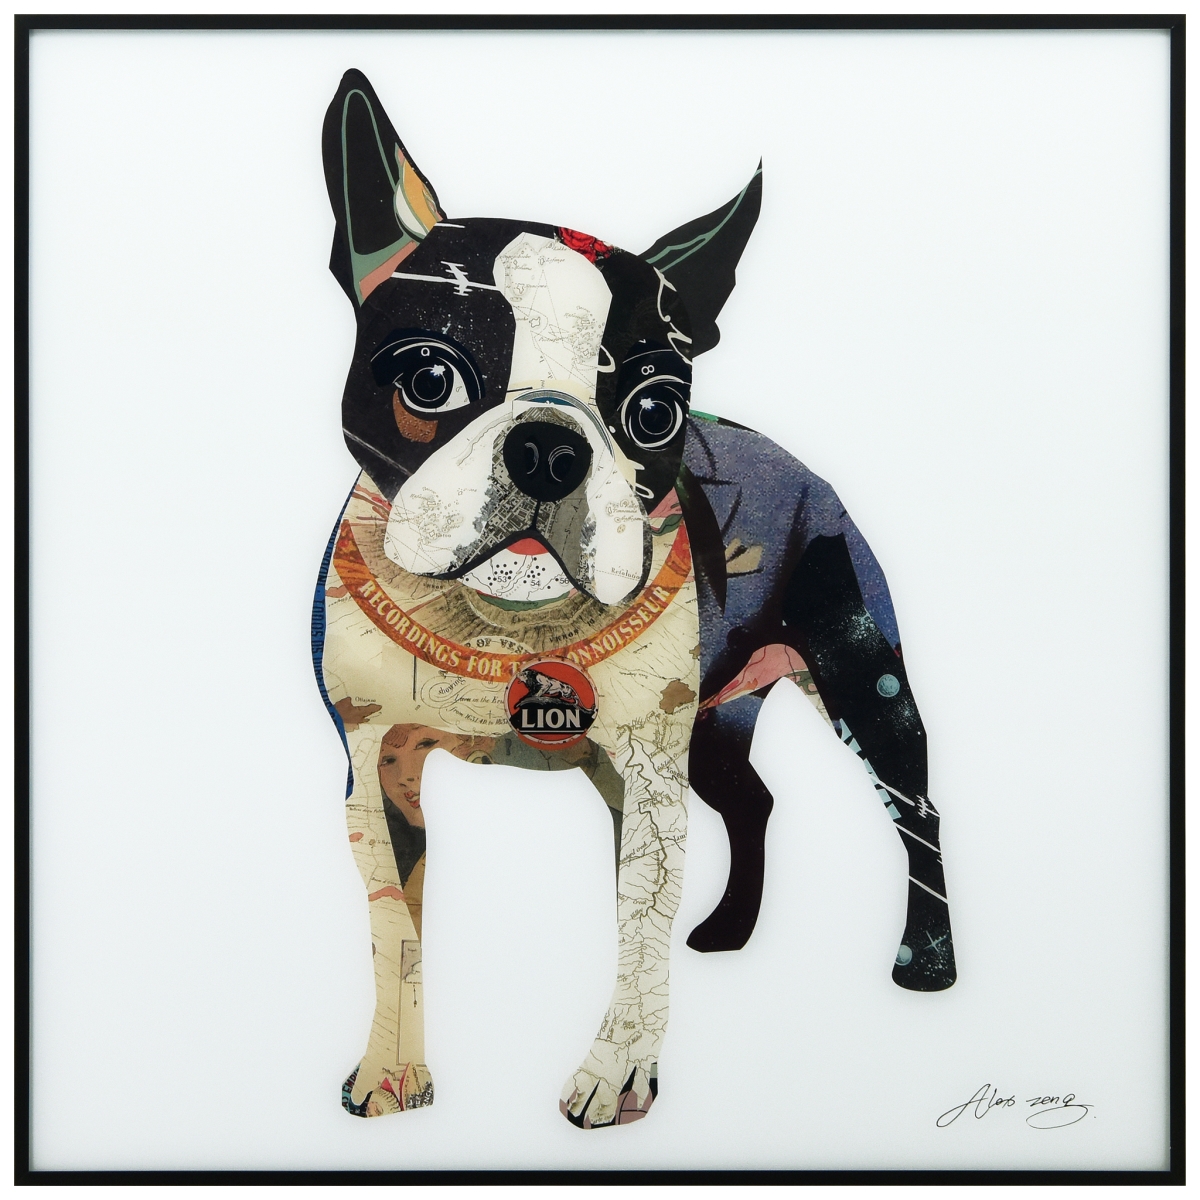 Aagb-az089-2424 24 X 24 In. Boston Terrier Reverse Printed Glass Wall Art With Black Anodized Aluminum Frame